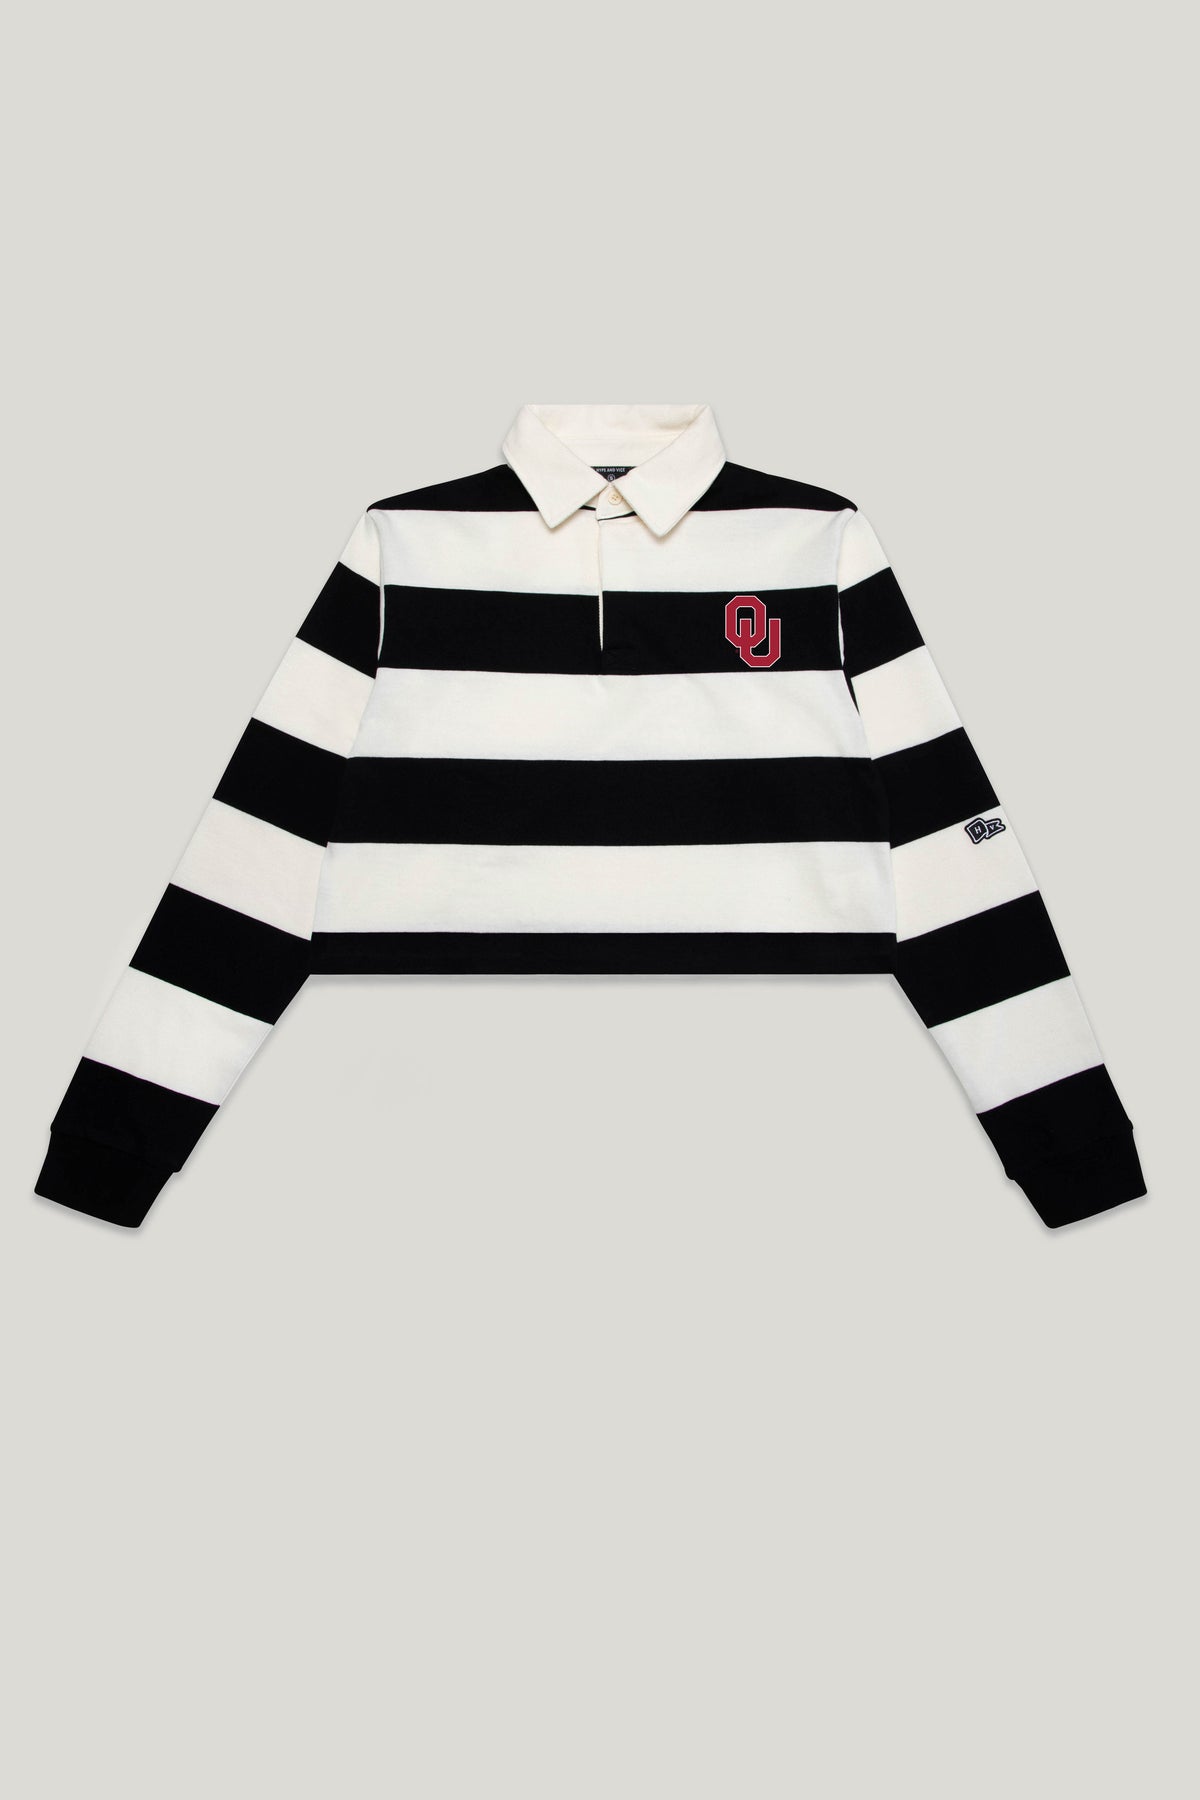 University of Oklahoma Rugby Top